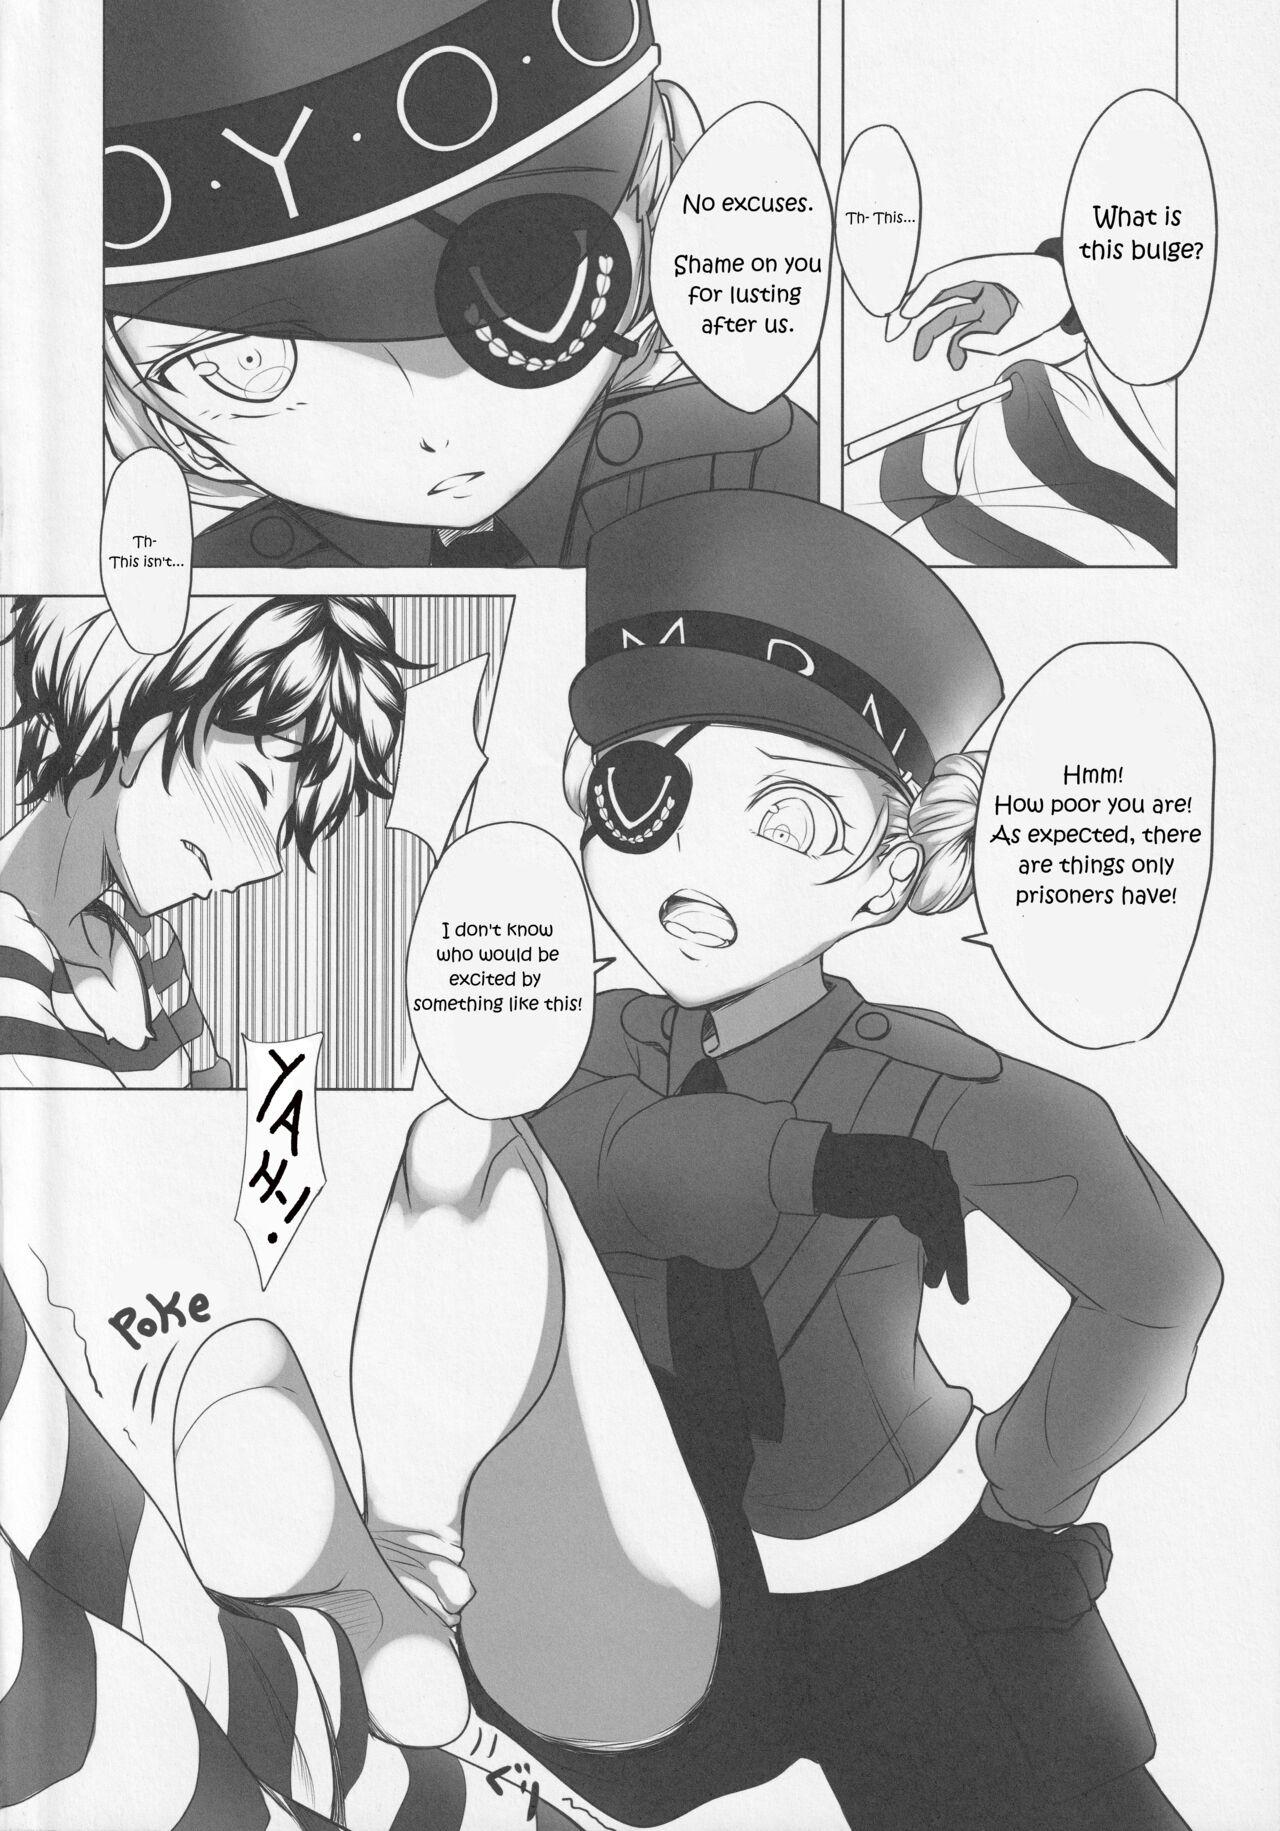 Topless Sounds Like You Need a Revive! - Persona 5 Squirting - Page 3